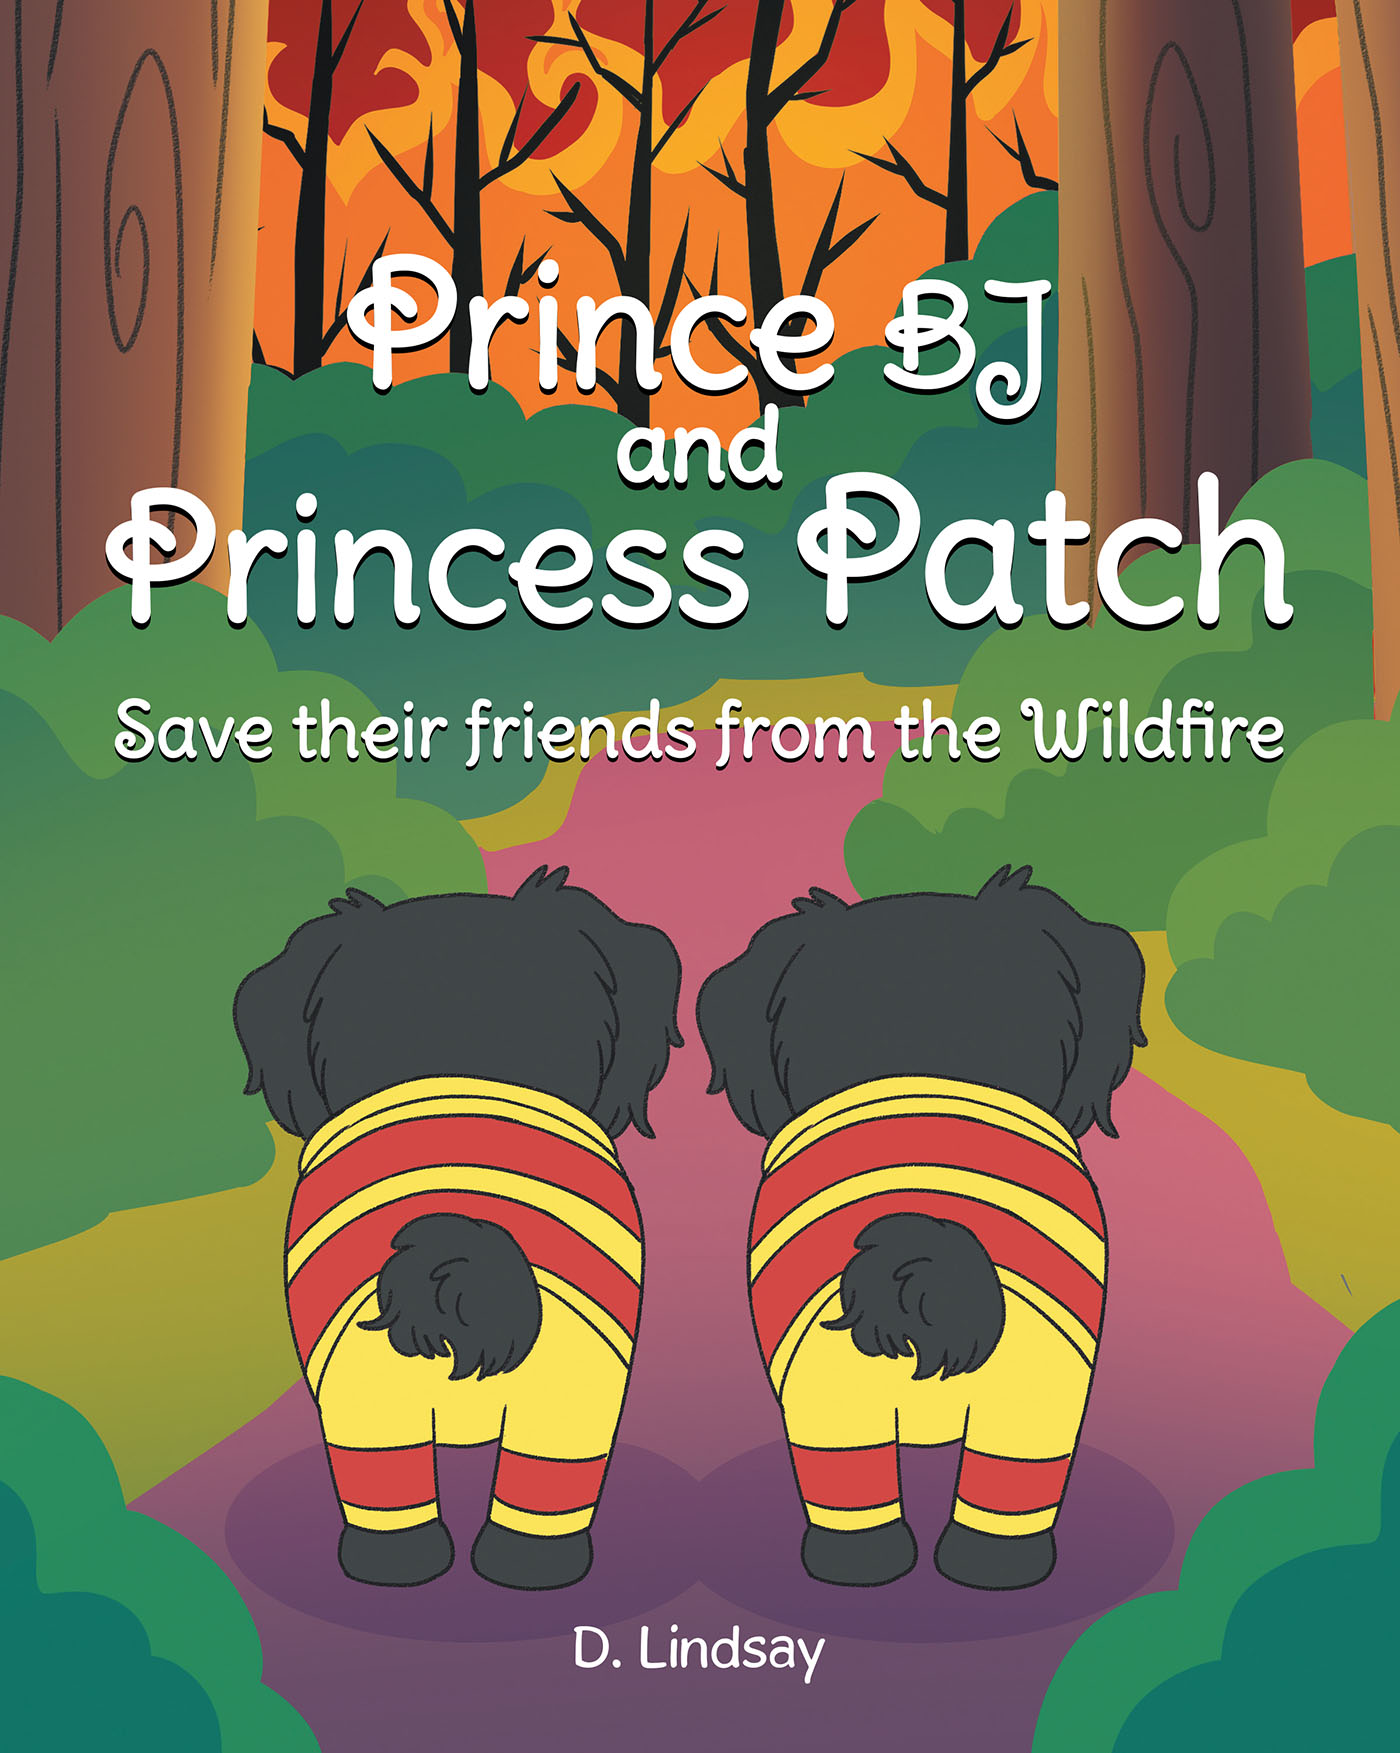 Author D. Lindsay’s New Book, “Prince BJ and Princess Patch Save their friends from the Wildfire” Follows Two Puppies Who Must Help to Put Out a Dangerous Wildfire